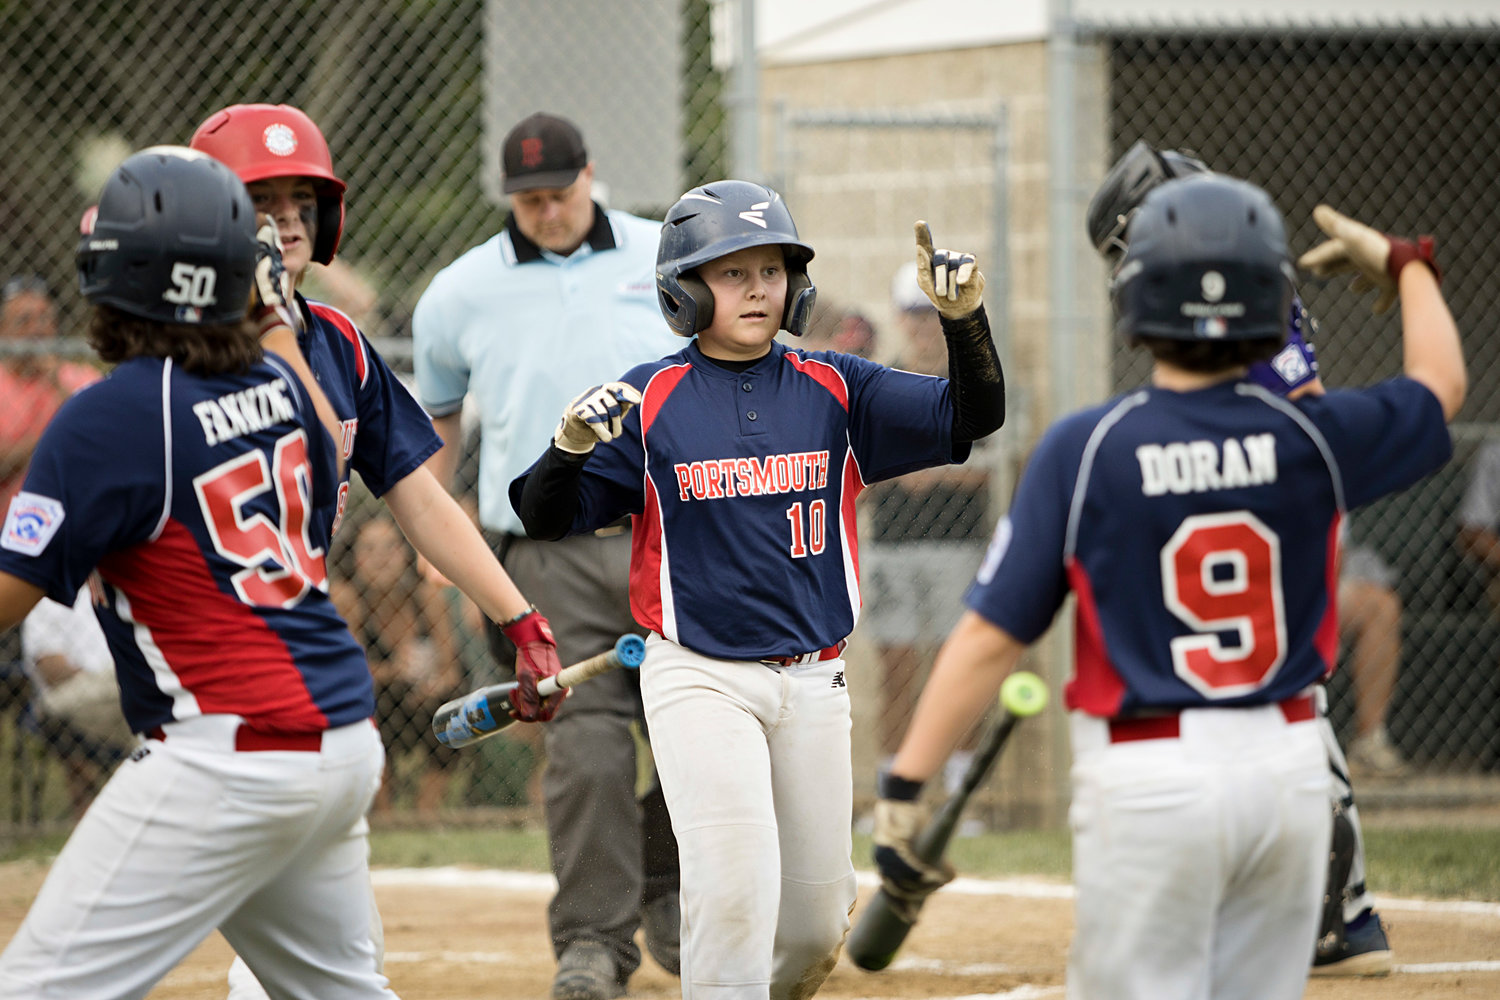 Ryan Campion (middle) celebrates with his teammates as runs come home.